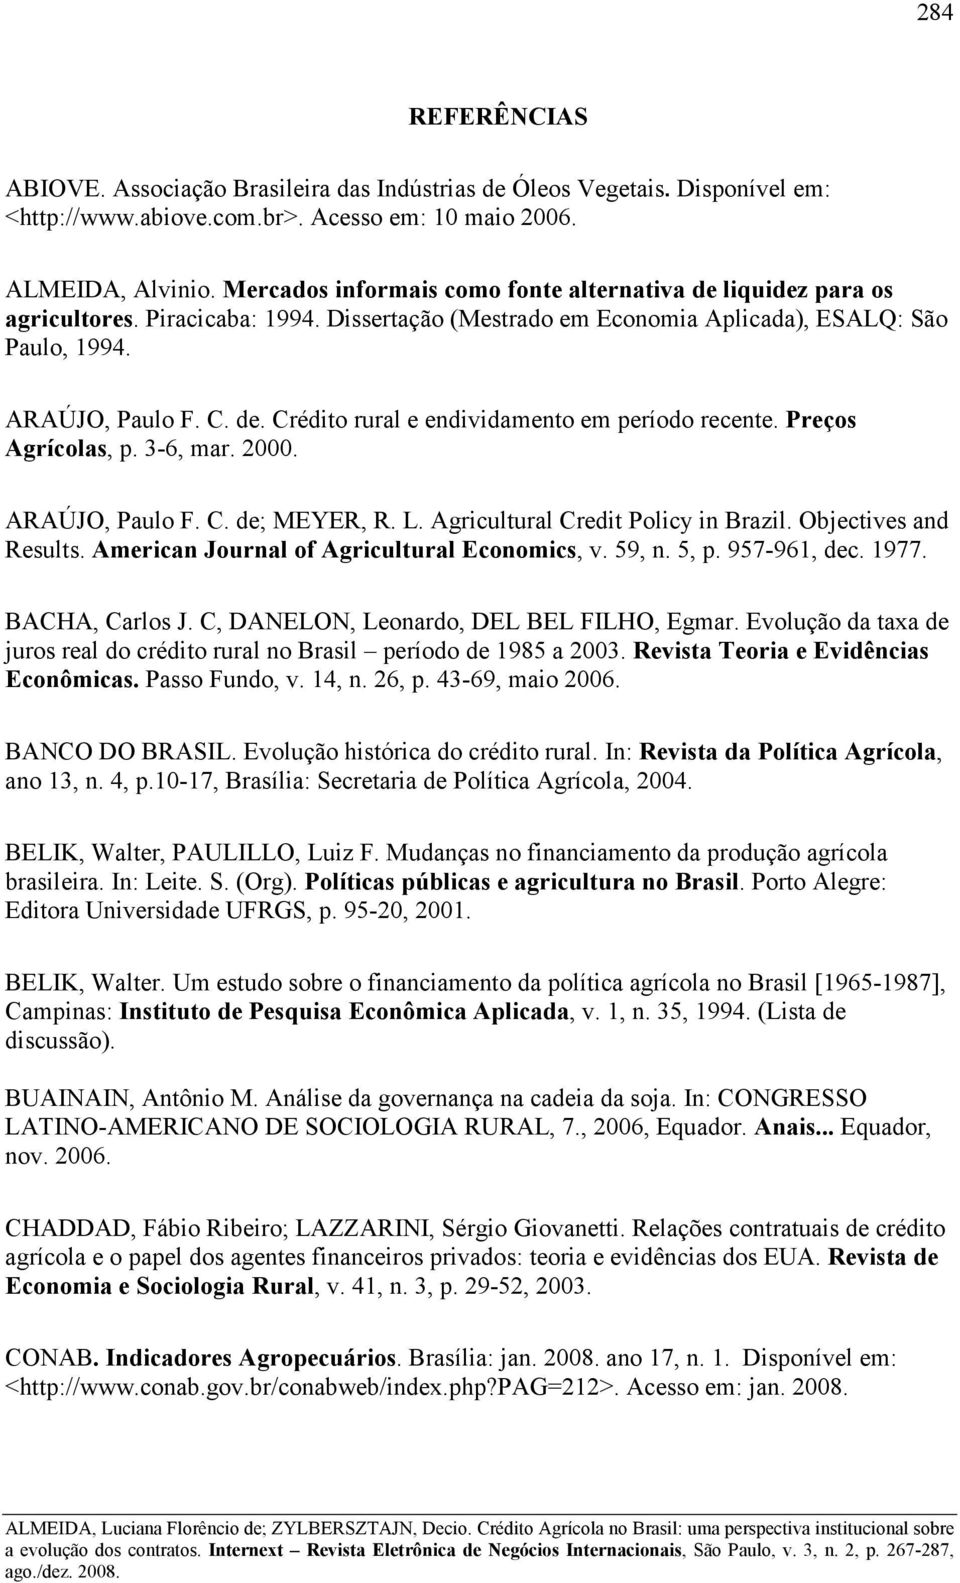 Preços Agrícolas, p. 3-6, mar. 2000. ARAÚJO, Paulo F. C. de; MEYER, R. L. Agricultural Credit Policy in Brazil. Objectives and Results. American Journal of Agricultural Economics, v. 59, n. 5, p.